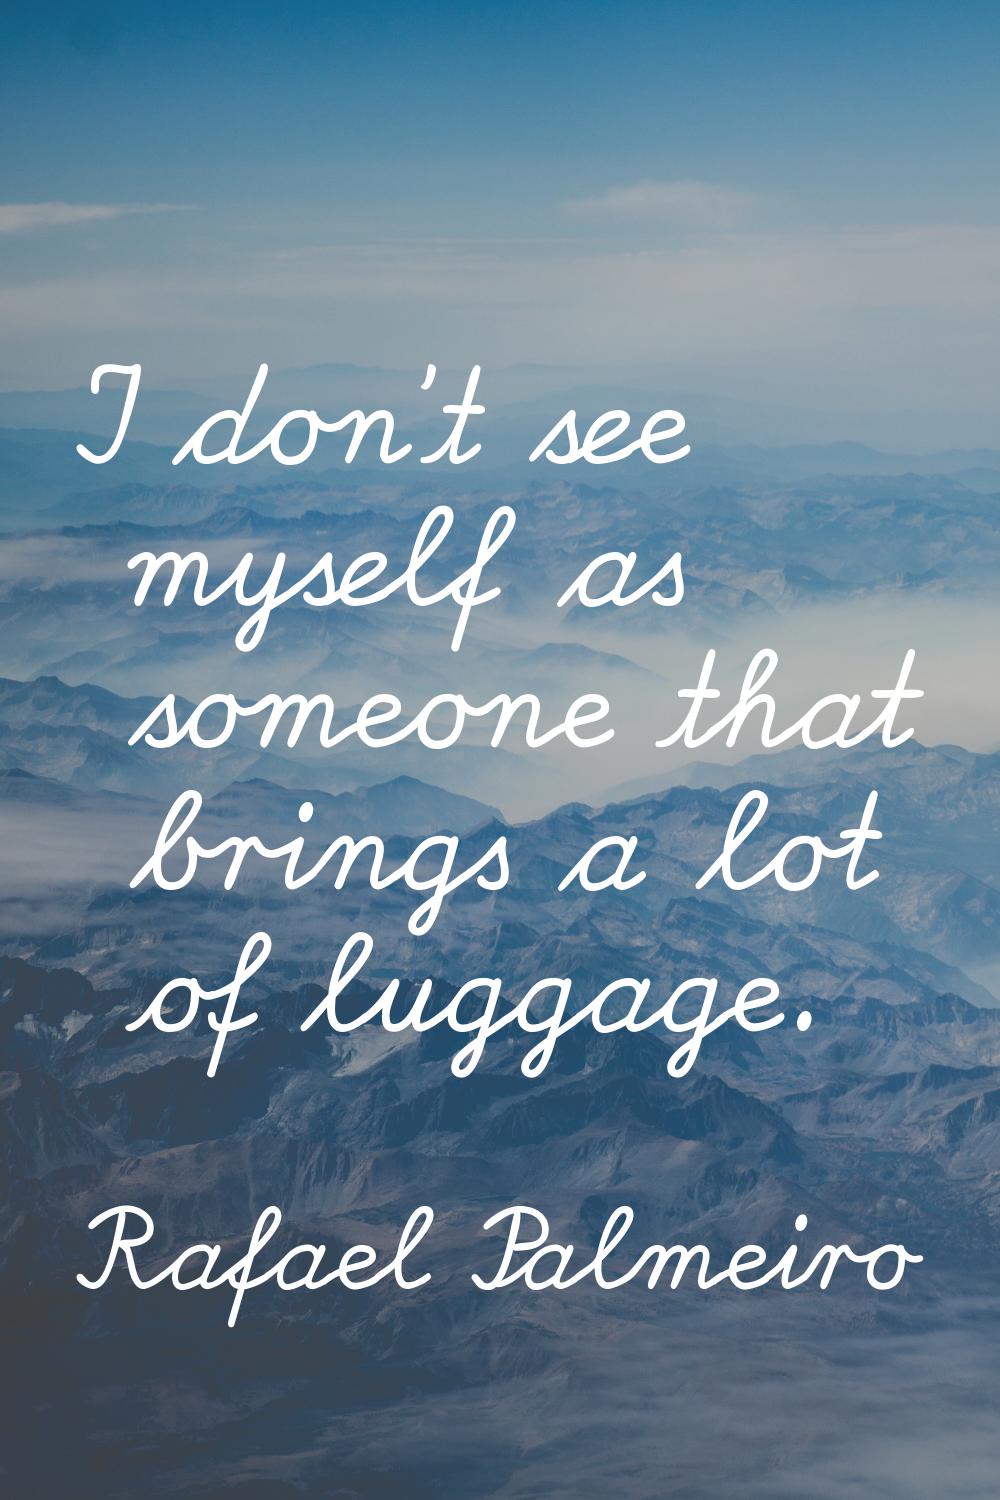 I don't see myself as someone that brings a lot of luggage.